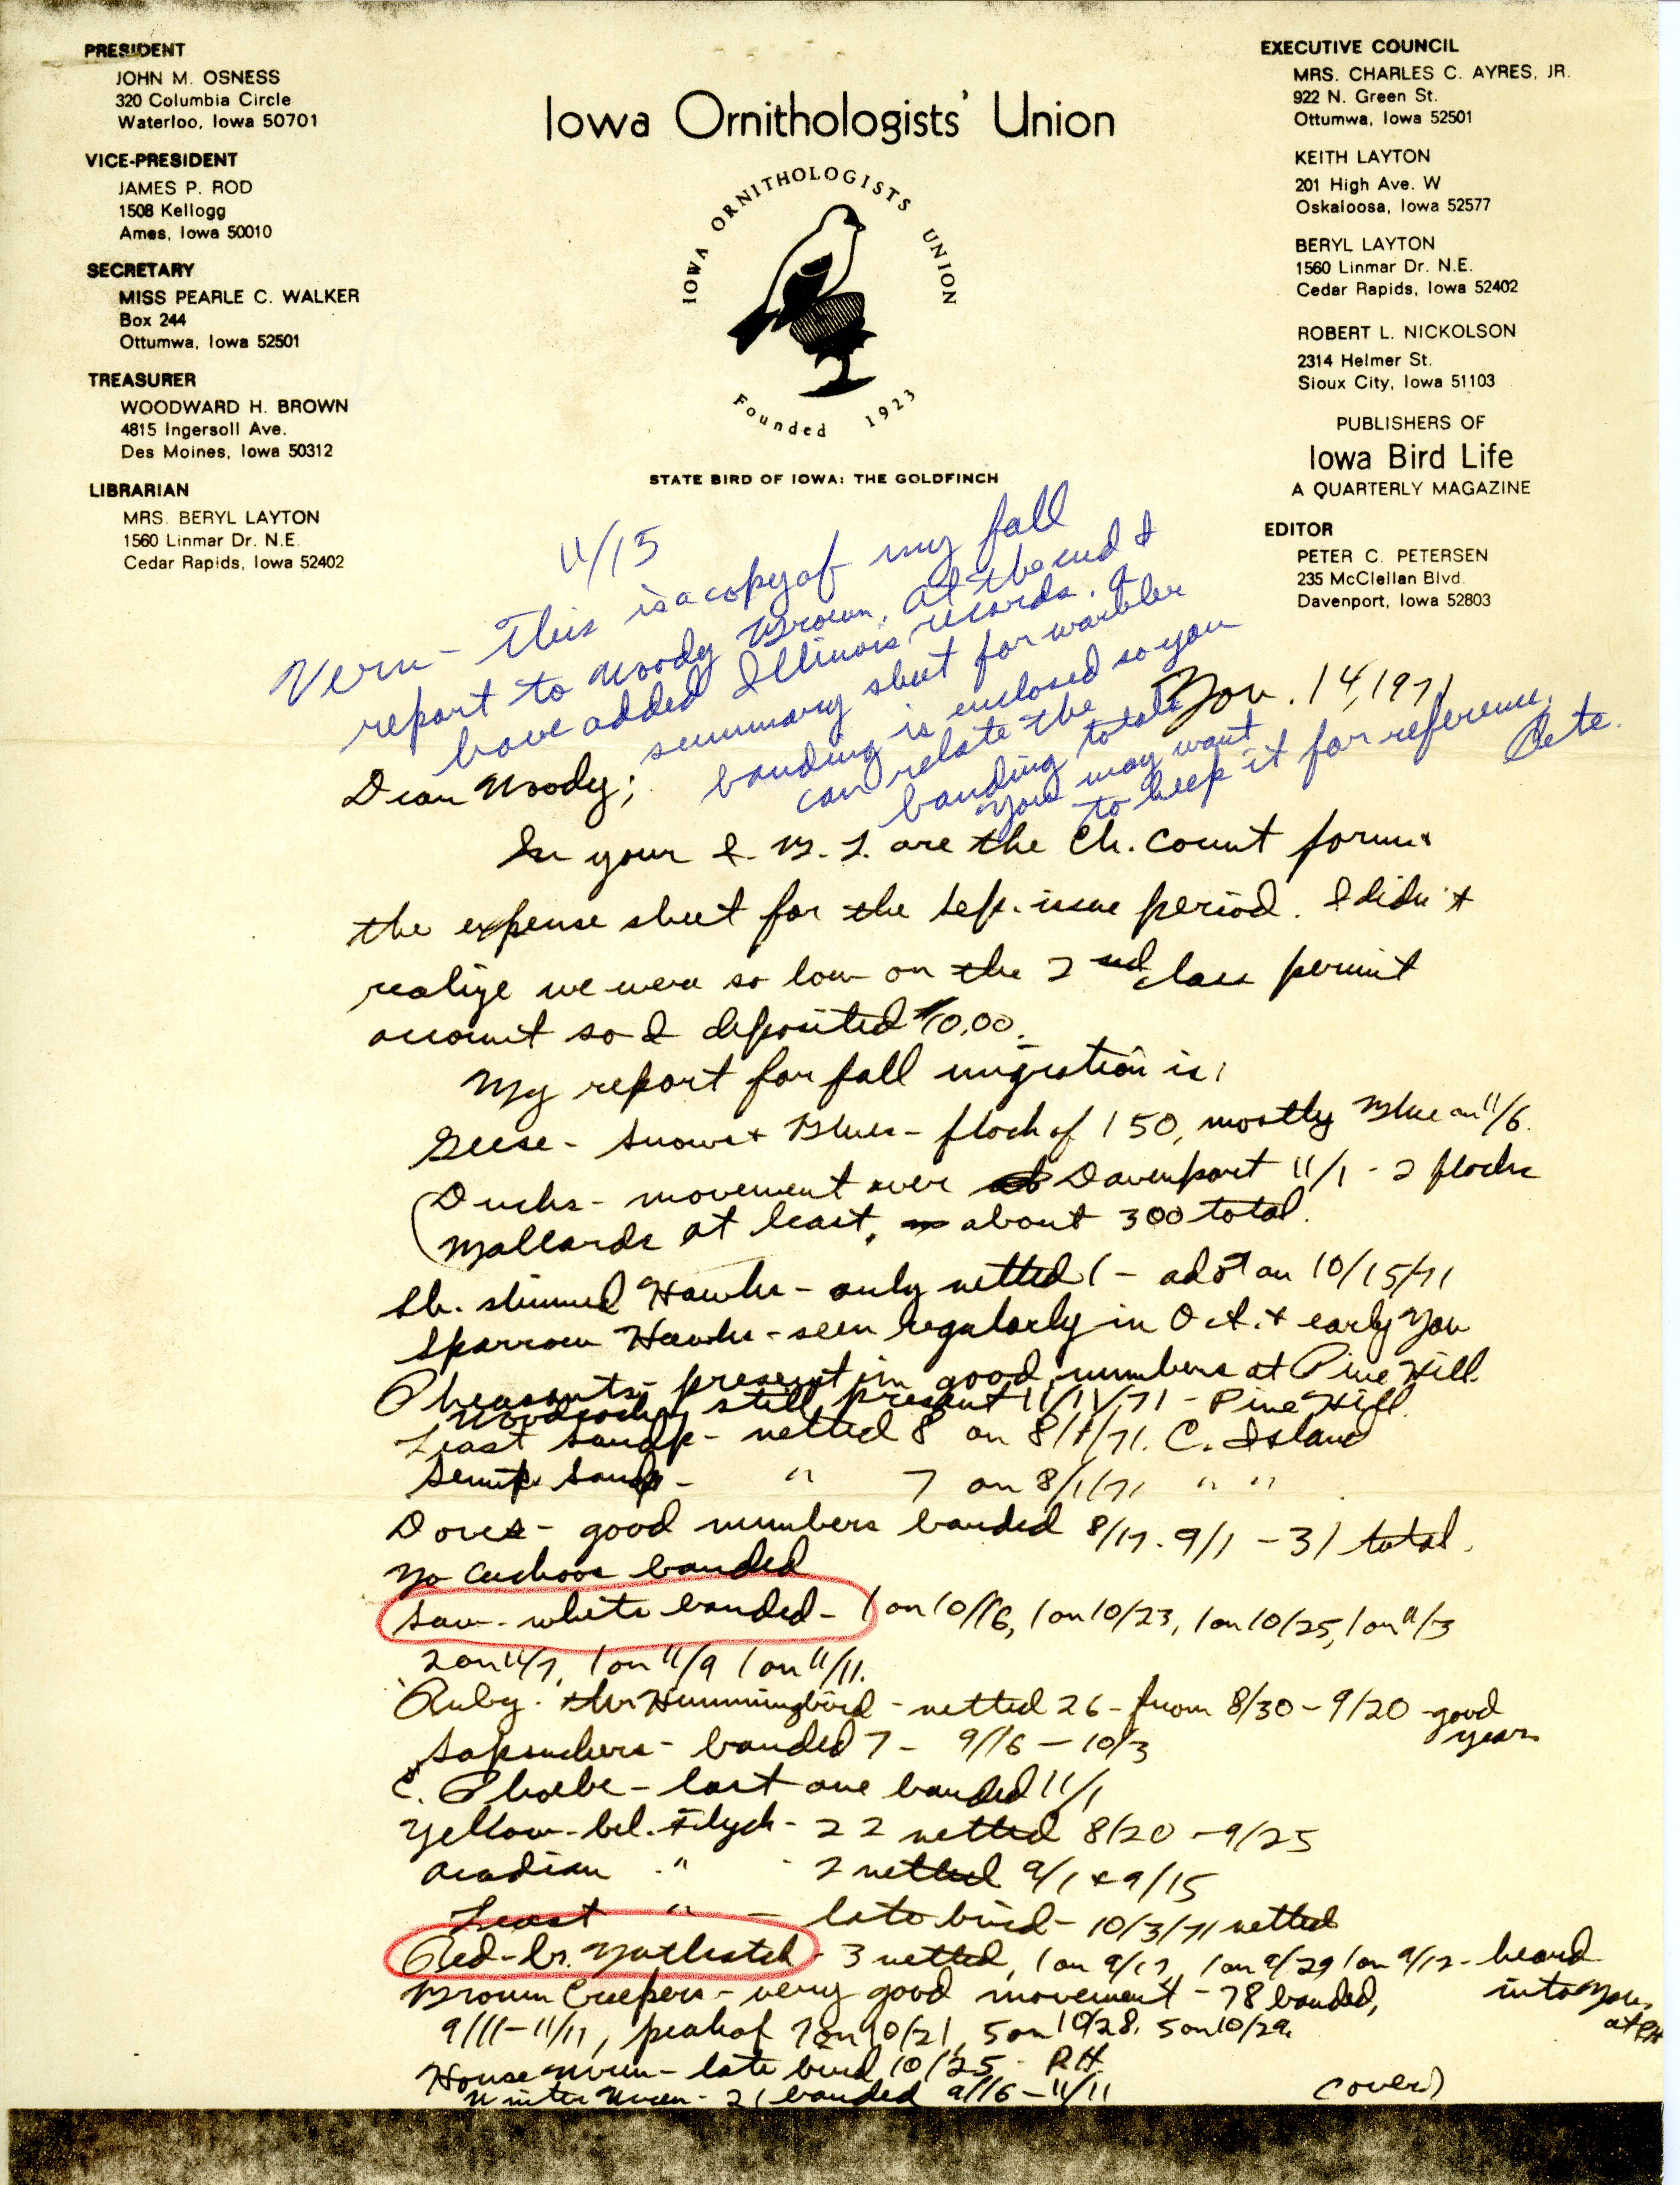 Peter C. Peterson letter to Woodward H. Brown, regarding fall migration 1971, November 14, 1971